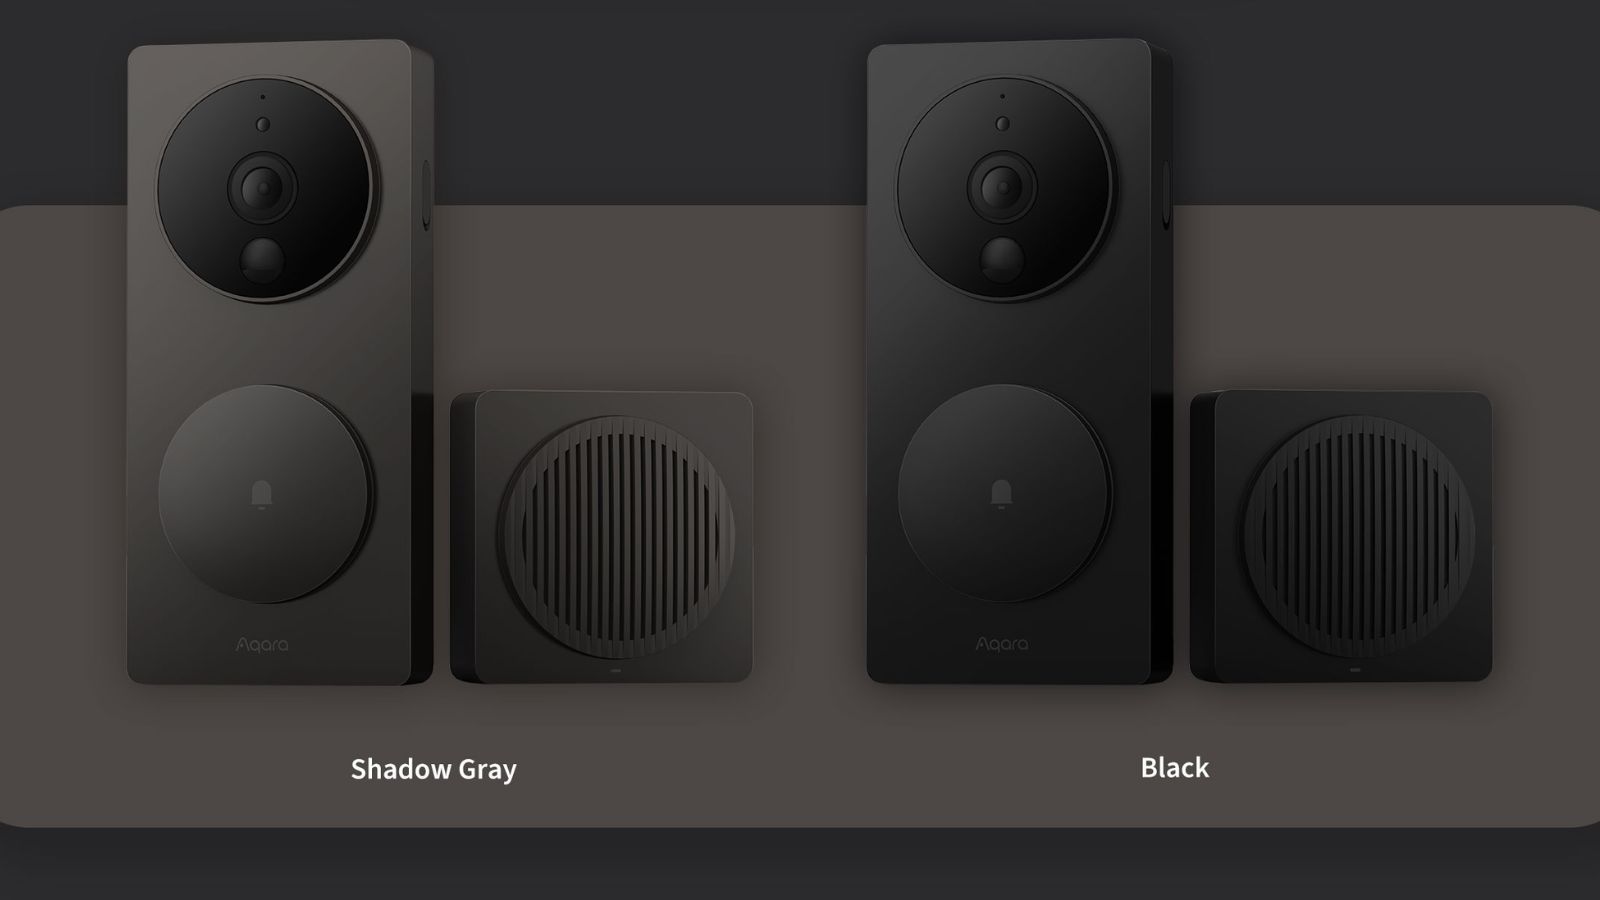 This New Apple Home-enabled doorbell has facial recognition – and it can change your voice